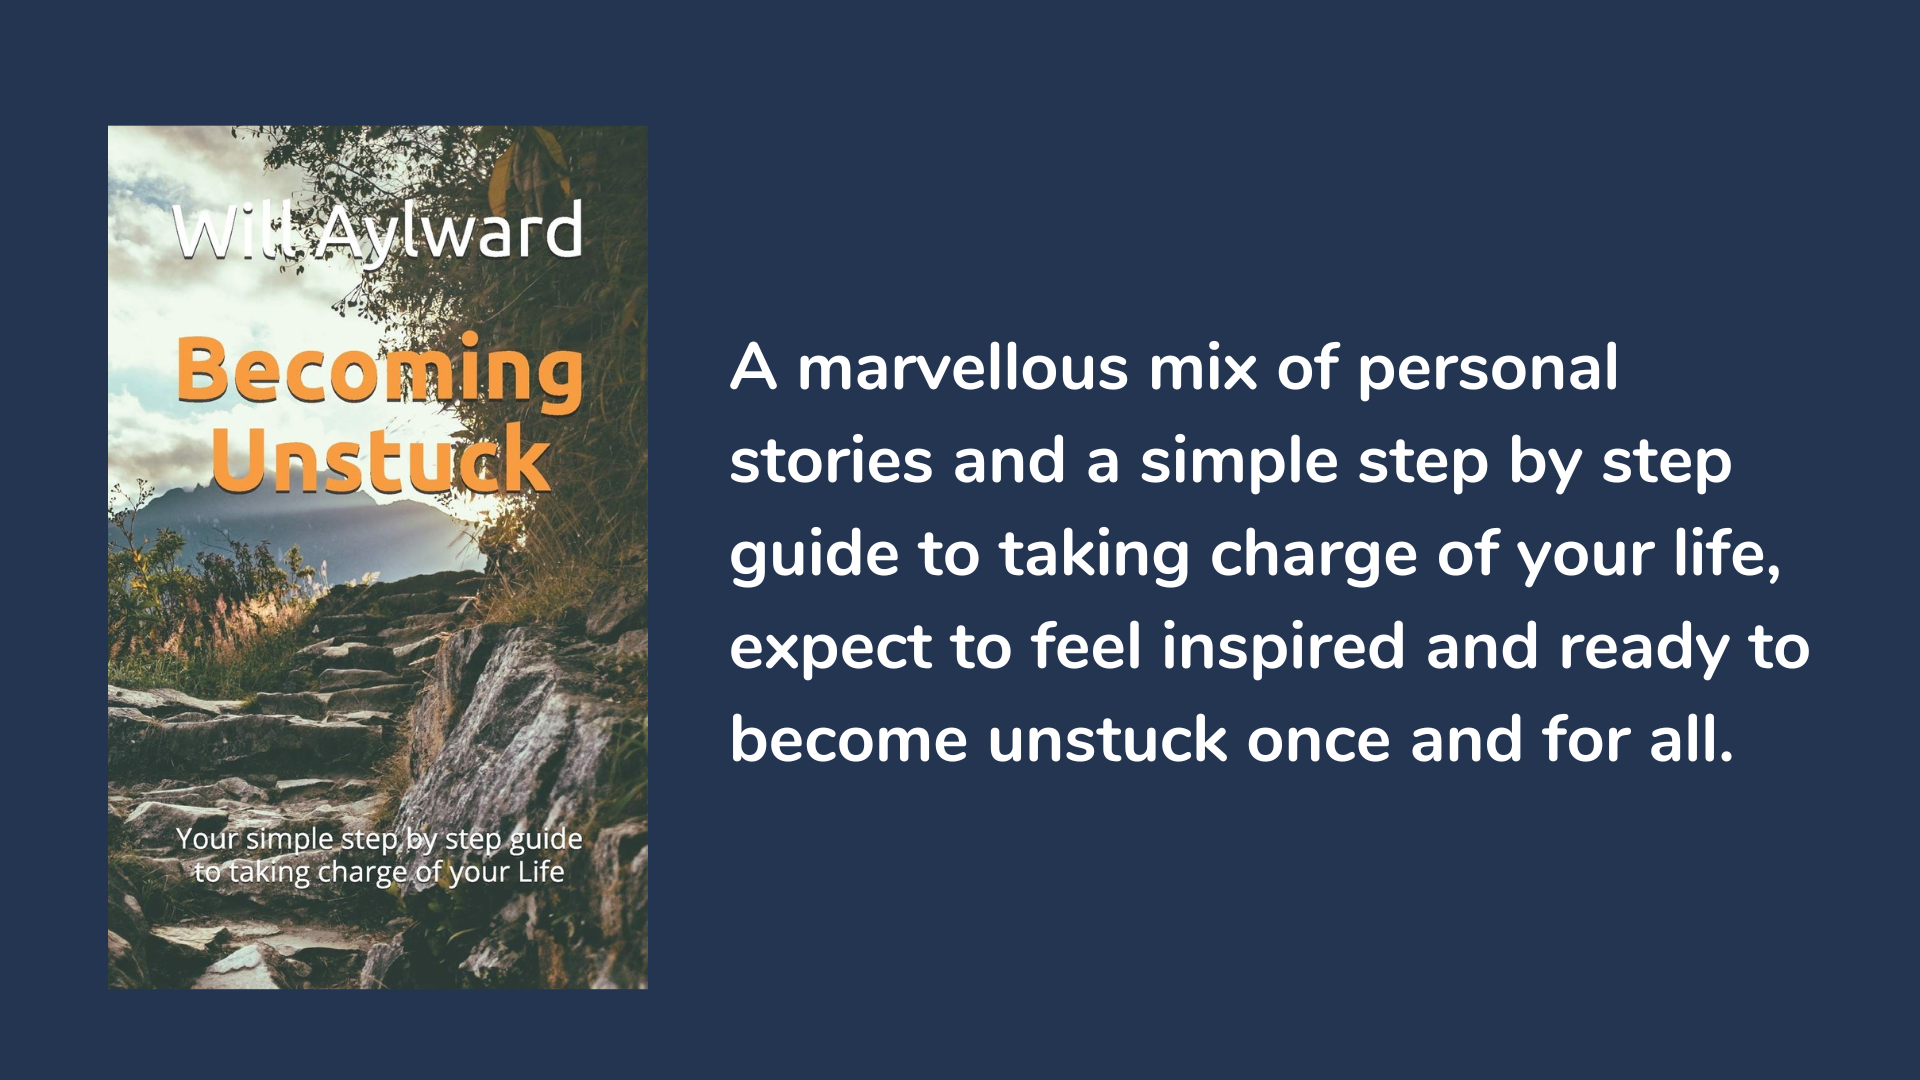 Becoming Unstuck: Your Simple Step By Step Guide To Taking Charge Of Your Life, book cover and description.